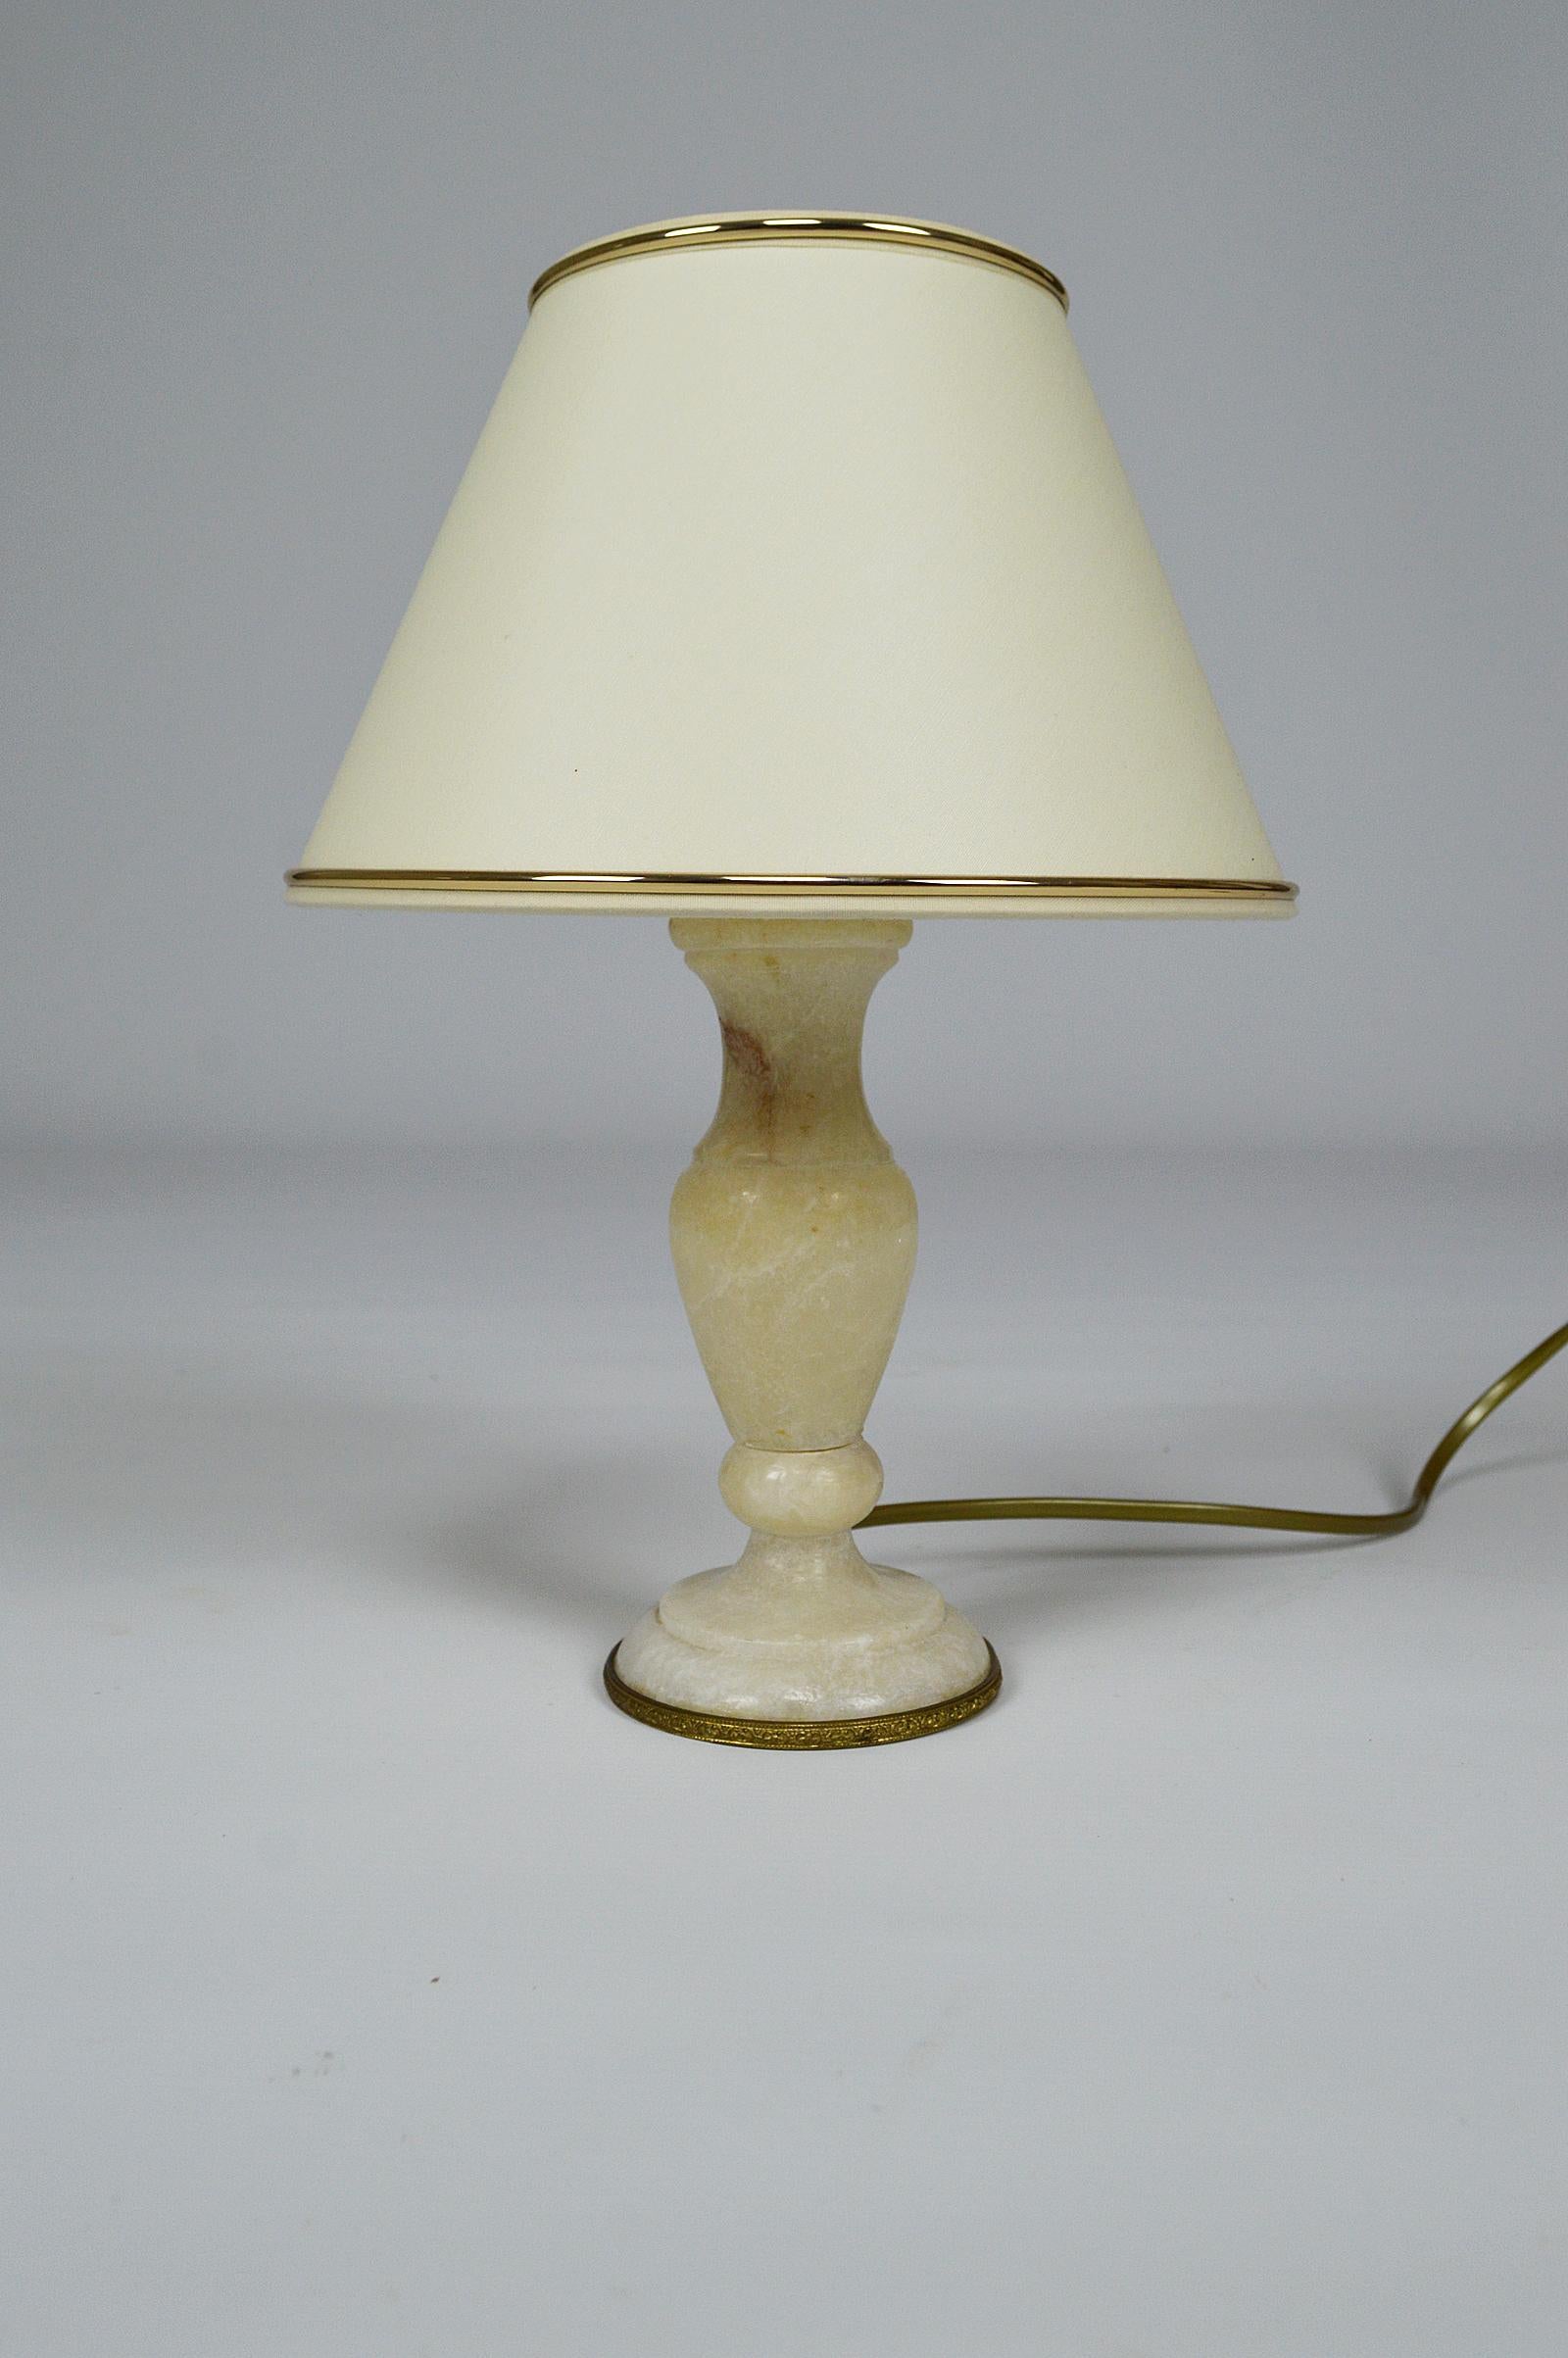 Small desk/bedside lamp in white/beige marble with chiseled bronze edge.
Cream and gold lampshade.

Neoclassical style, Italy, circa 1920.

In very good condition, electricity redone, new lampshade.

Dimensions:
Height 30 cm
Diameter 23 cm